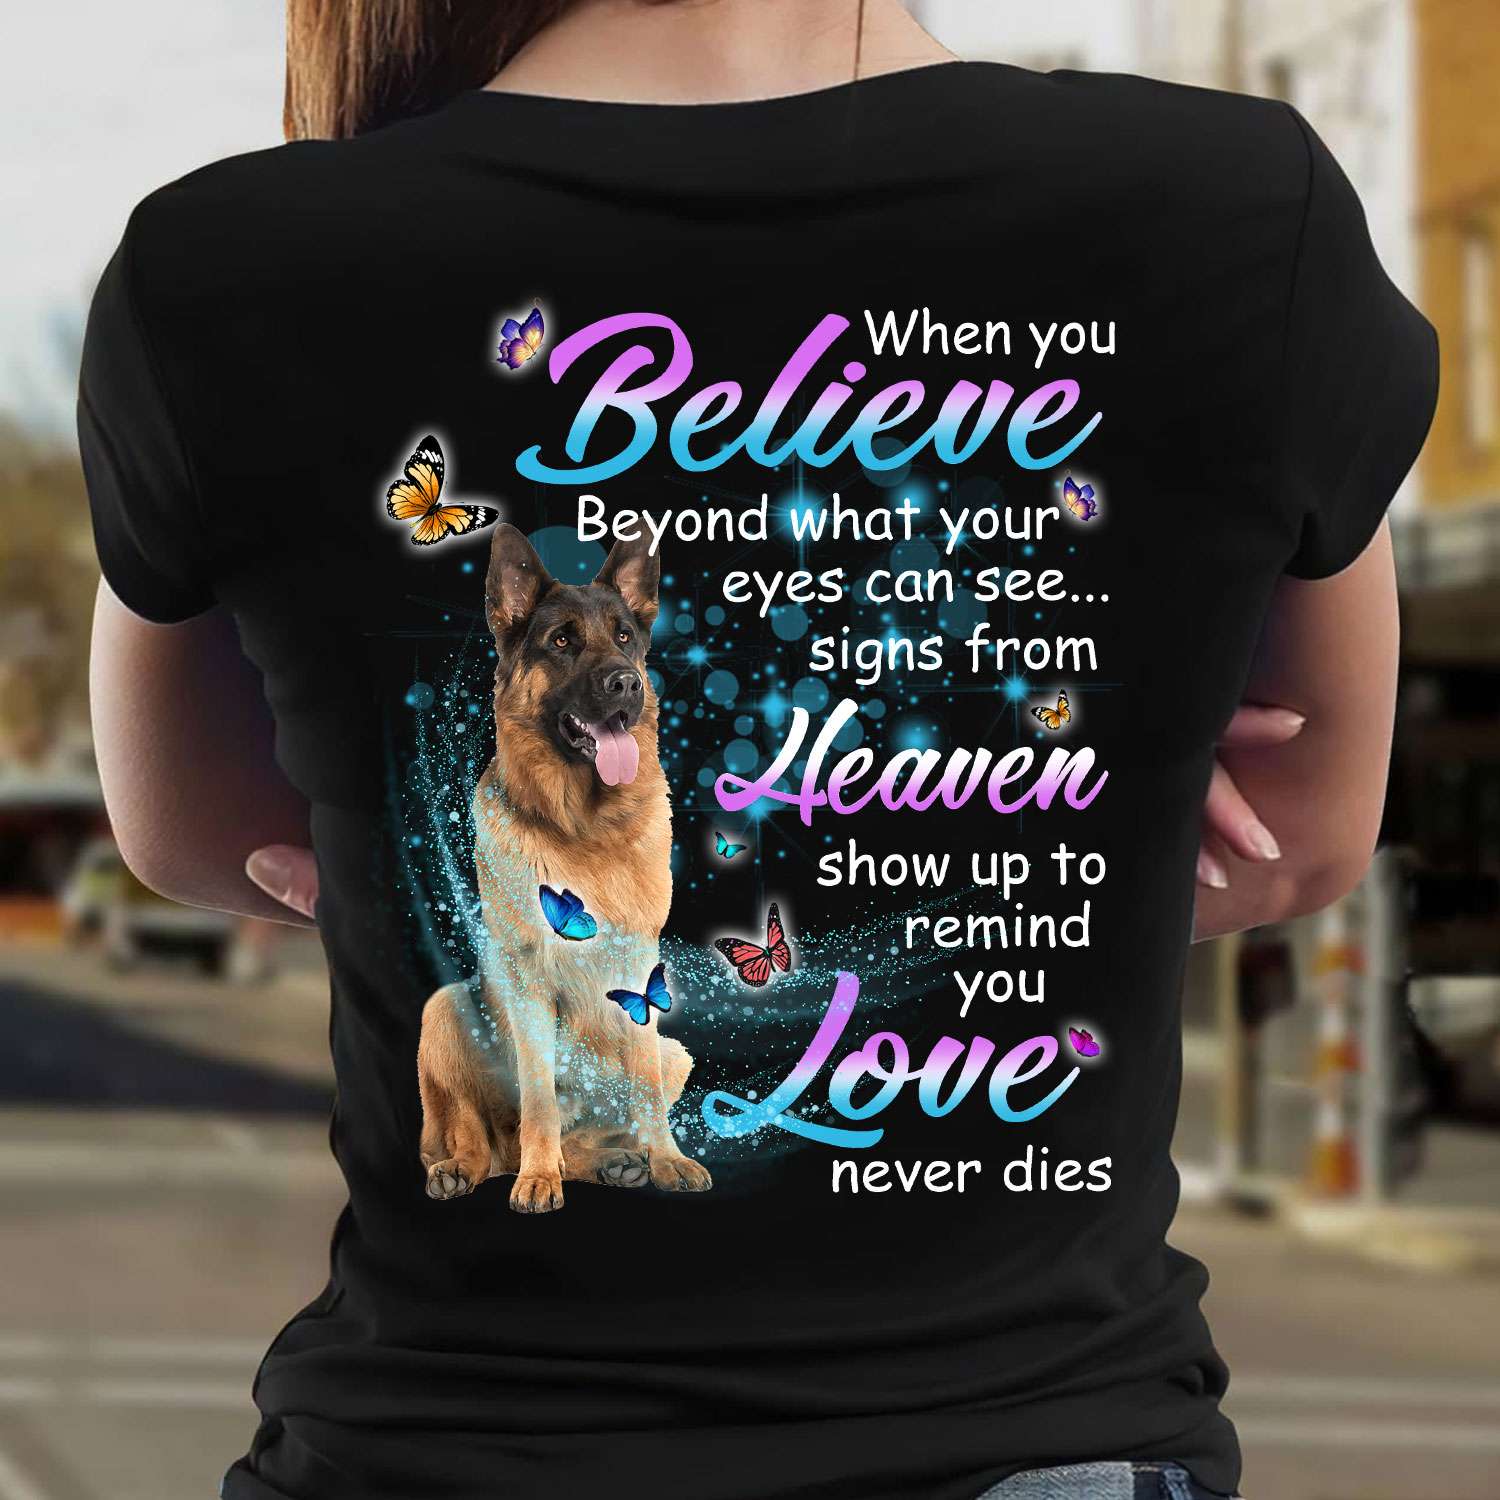 When you believe beyond what your eyes can see signs from heaven - German shepherd dog, gift for dog lover